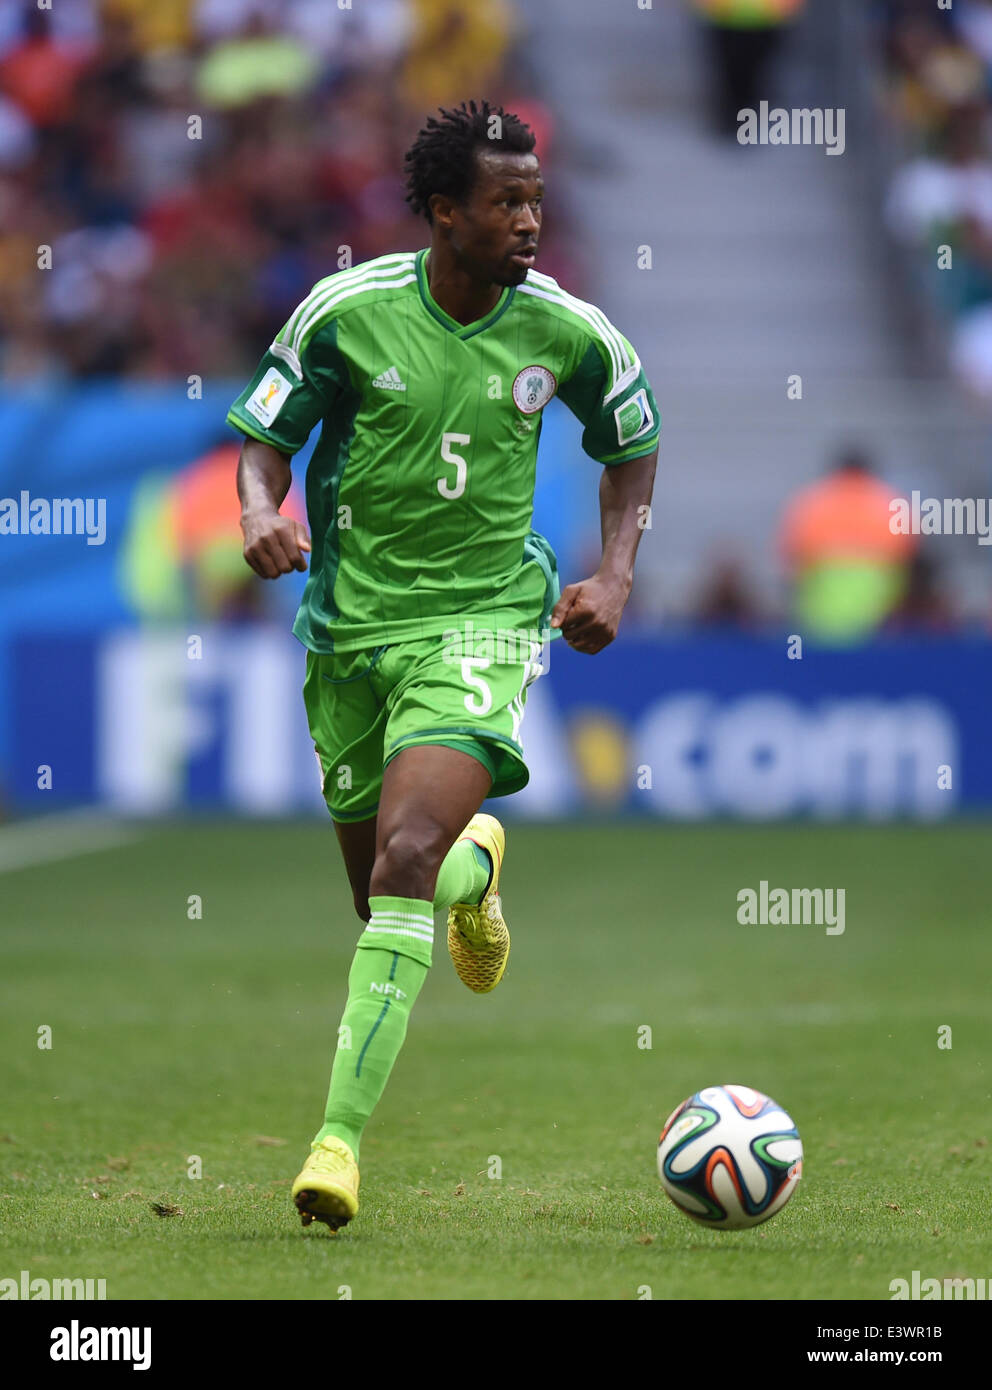 Brasilia, Brazil. 30th June, 2014. Efe Ambrose of Nigeria in action during the FIFA World Cup 2014 round of 16 match between France and Nigeria at the Estadio National Stadium in Brasilia, Brazil, on 30 June 2014. Credit:  dpa picture alliance/Alamy Live News Stock Photo